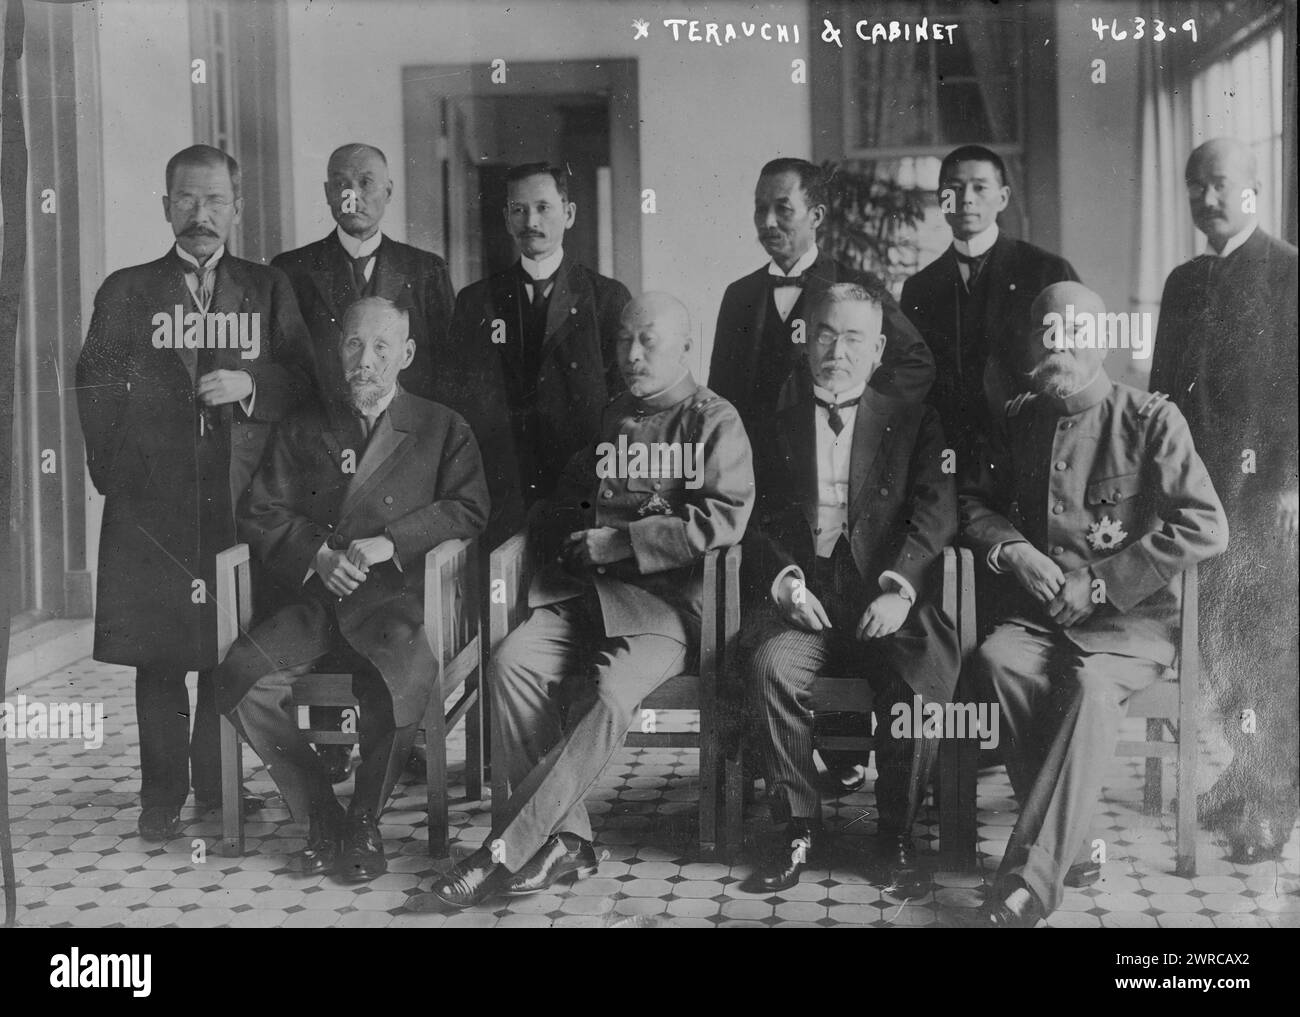 Terauchi & cabinet, Photograph shows Count Terauchi Masatake (1852-1919) who was a Gensui (Marshal) in the Imperial Japanese Army and served as Prime Minister (1916-1918), with his cabinet., between ca. 1915 and ca. 1920, Glass negatives, 1 negative: glass Stock Photo